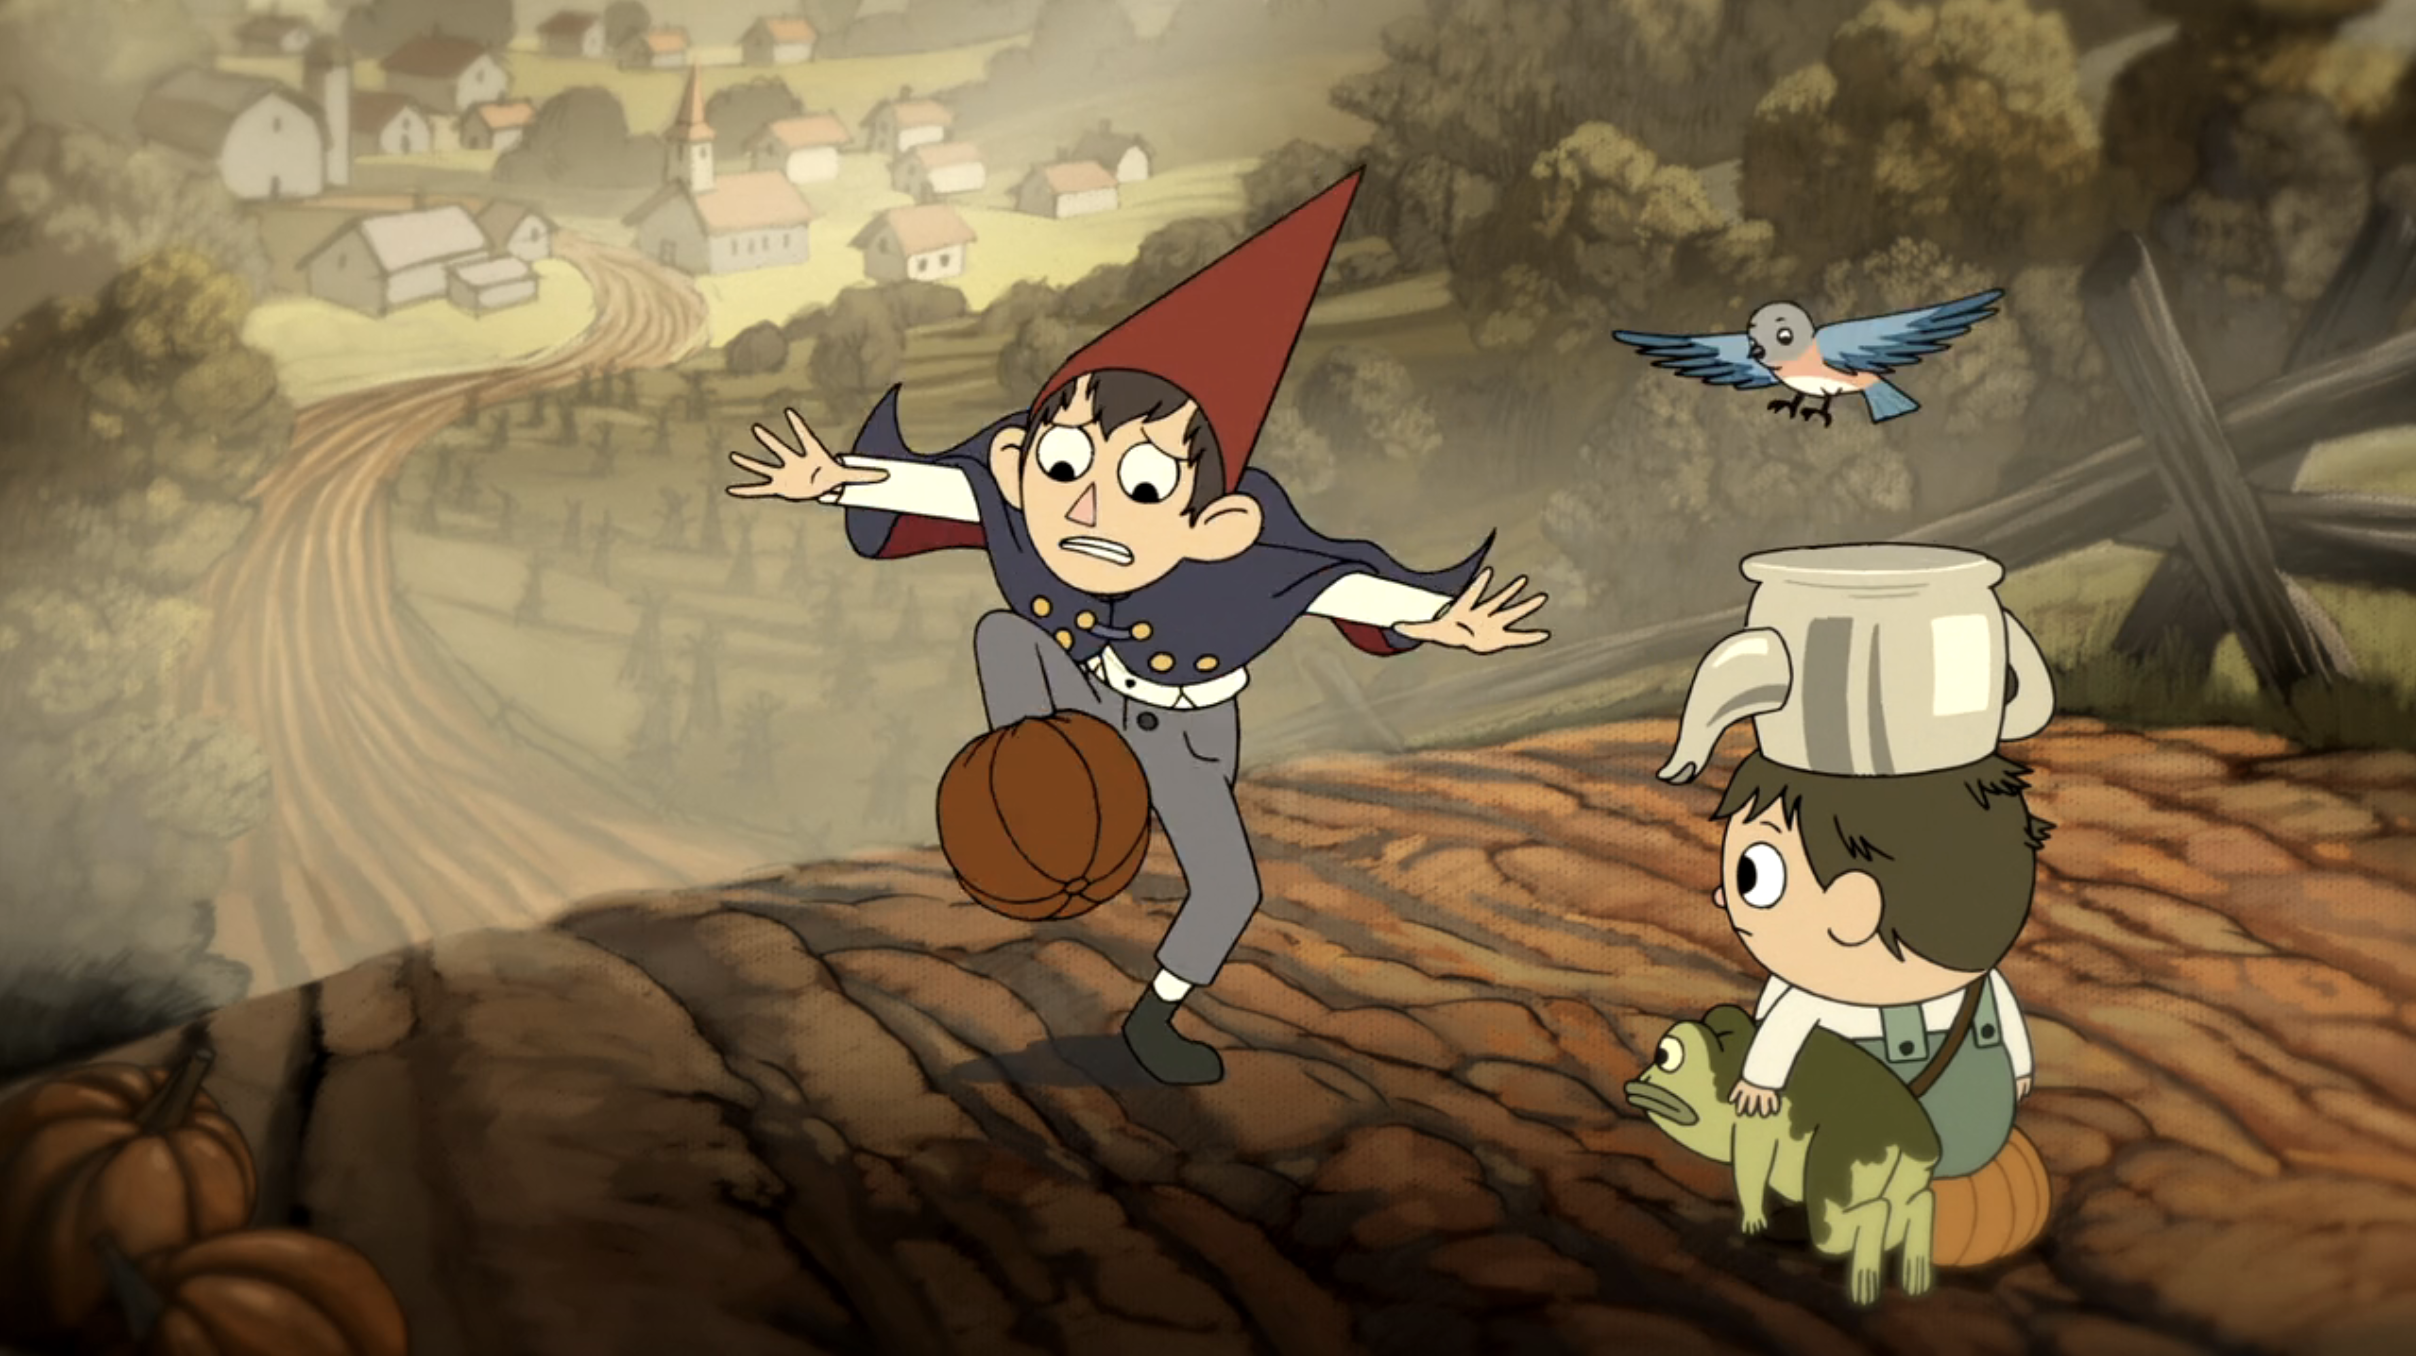 Two young children in Over the Garden Wall. One wears a point red hat and has his foot in a pumpkin. Another wears a pot on his head and holds a frog. A blue bird flies near them.